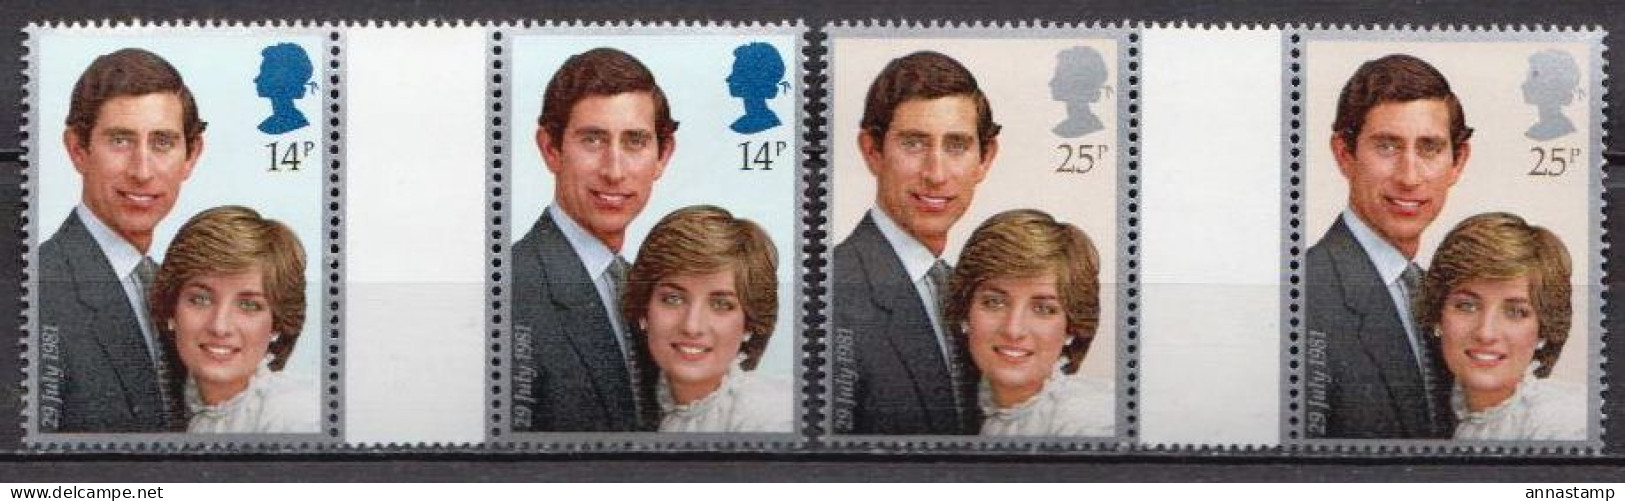 Great Britain MNH Set In Gutter Pairs - Familles Royales